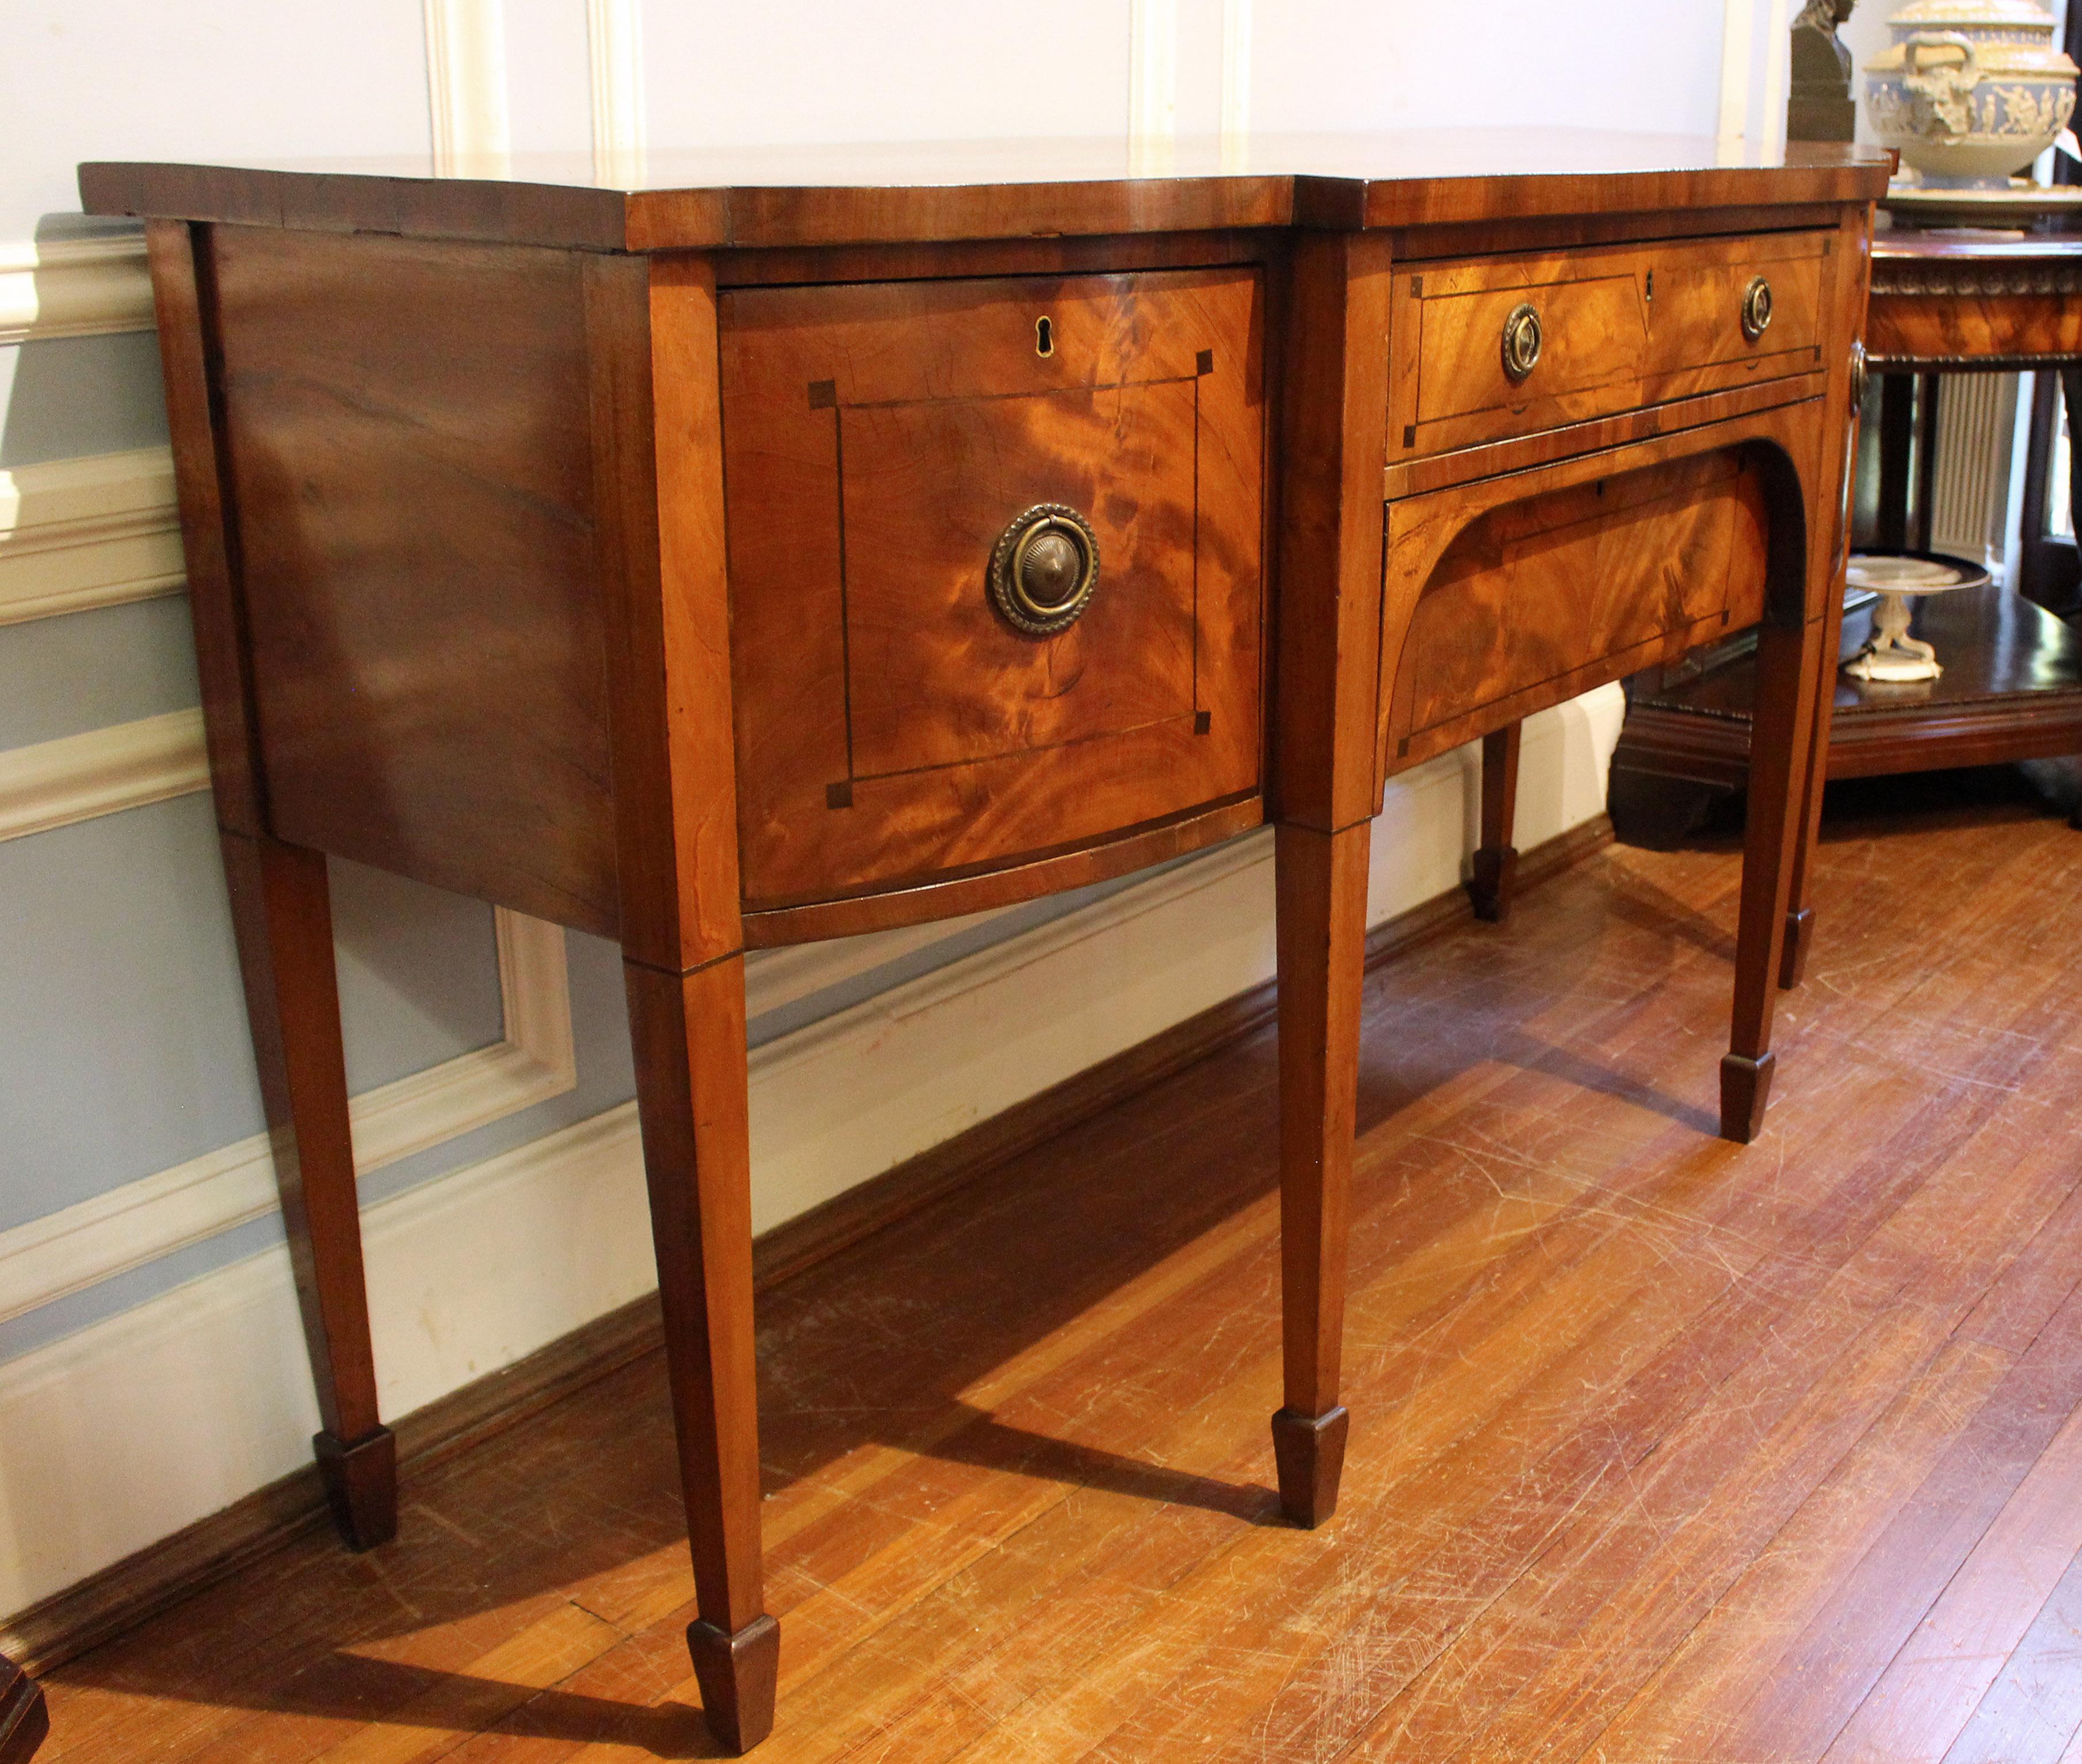 Circa 1780 George III Bowfront Sideboard, English In Good Condition For Sale In Chapel Hill, NC